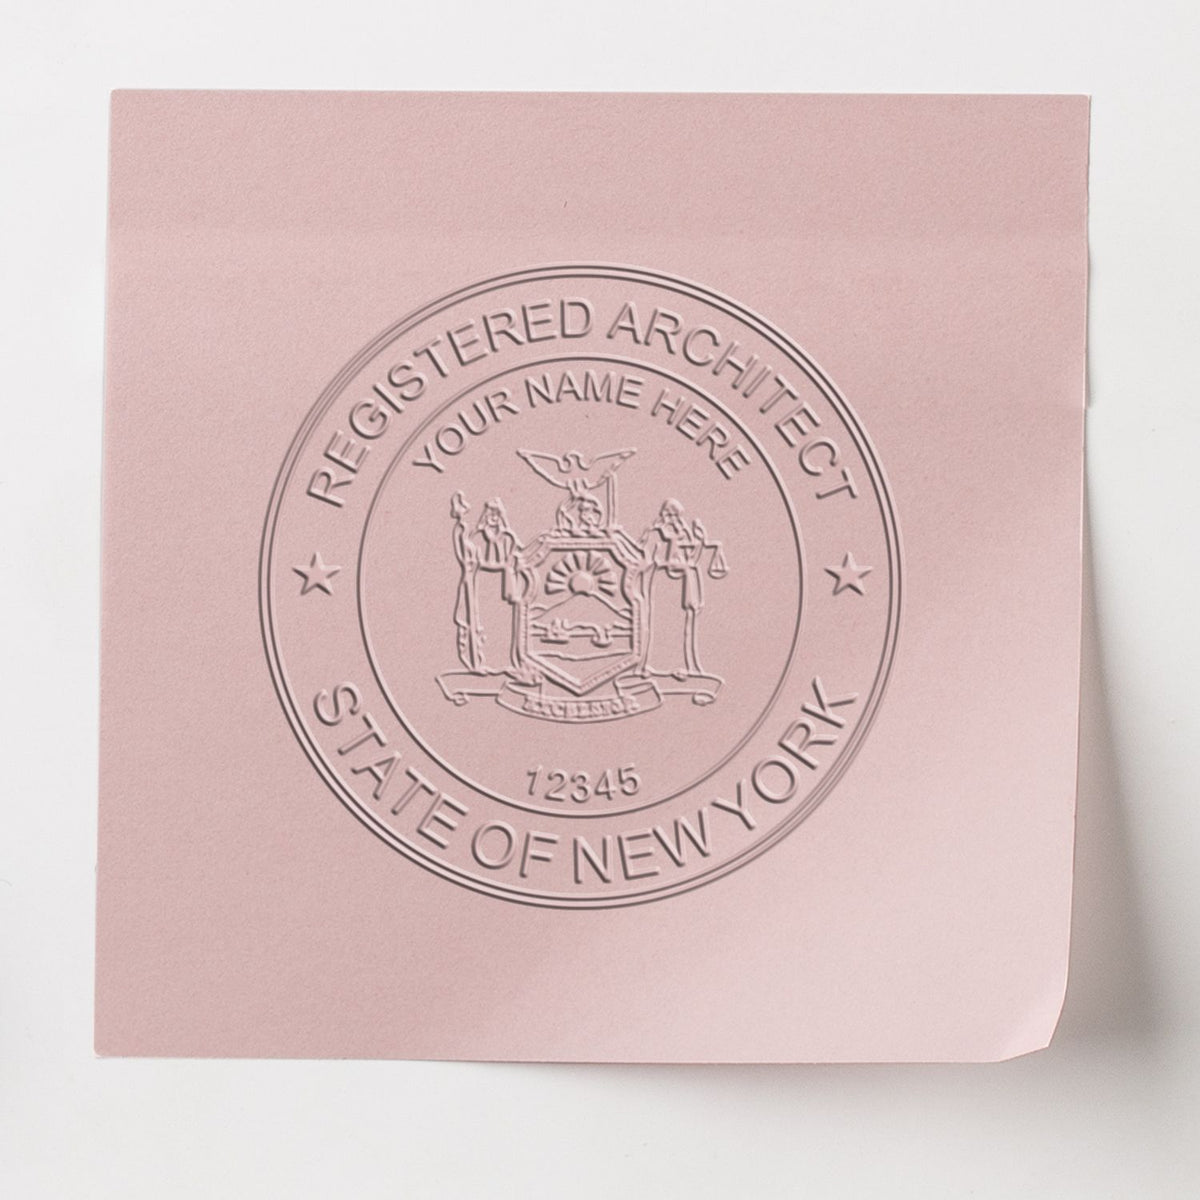 The New York Desk Architect Embossing Seal stamp impression comes to life with a crisp, detailed photo on paper - showcasing true professional quality.